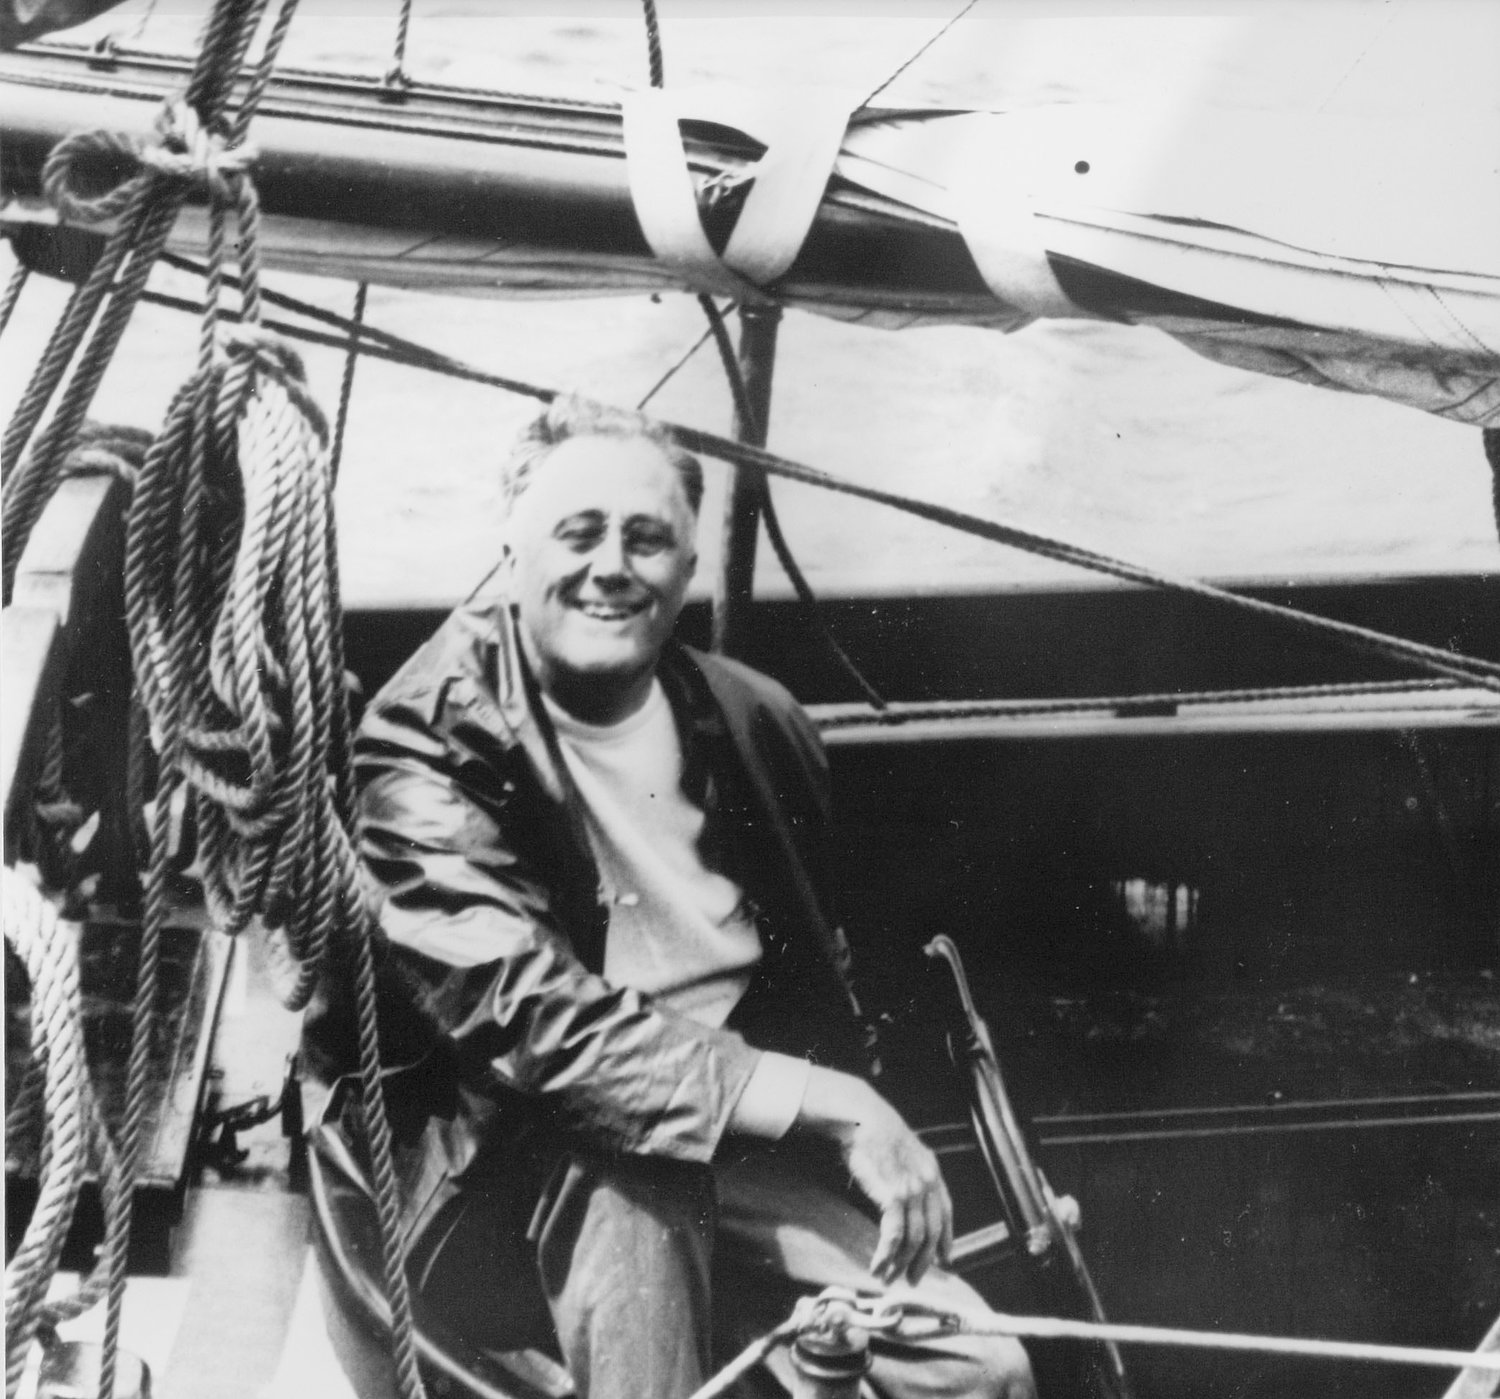 President Franklin D. Roosevelt on the yawl Amberjack II, during a 1933 visit to Nantucket.